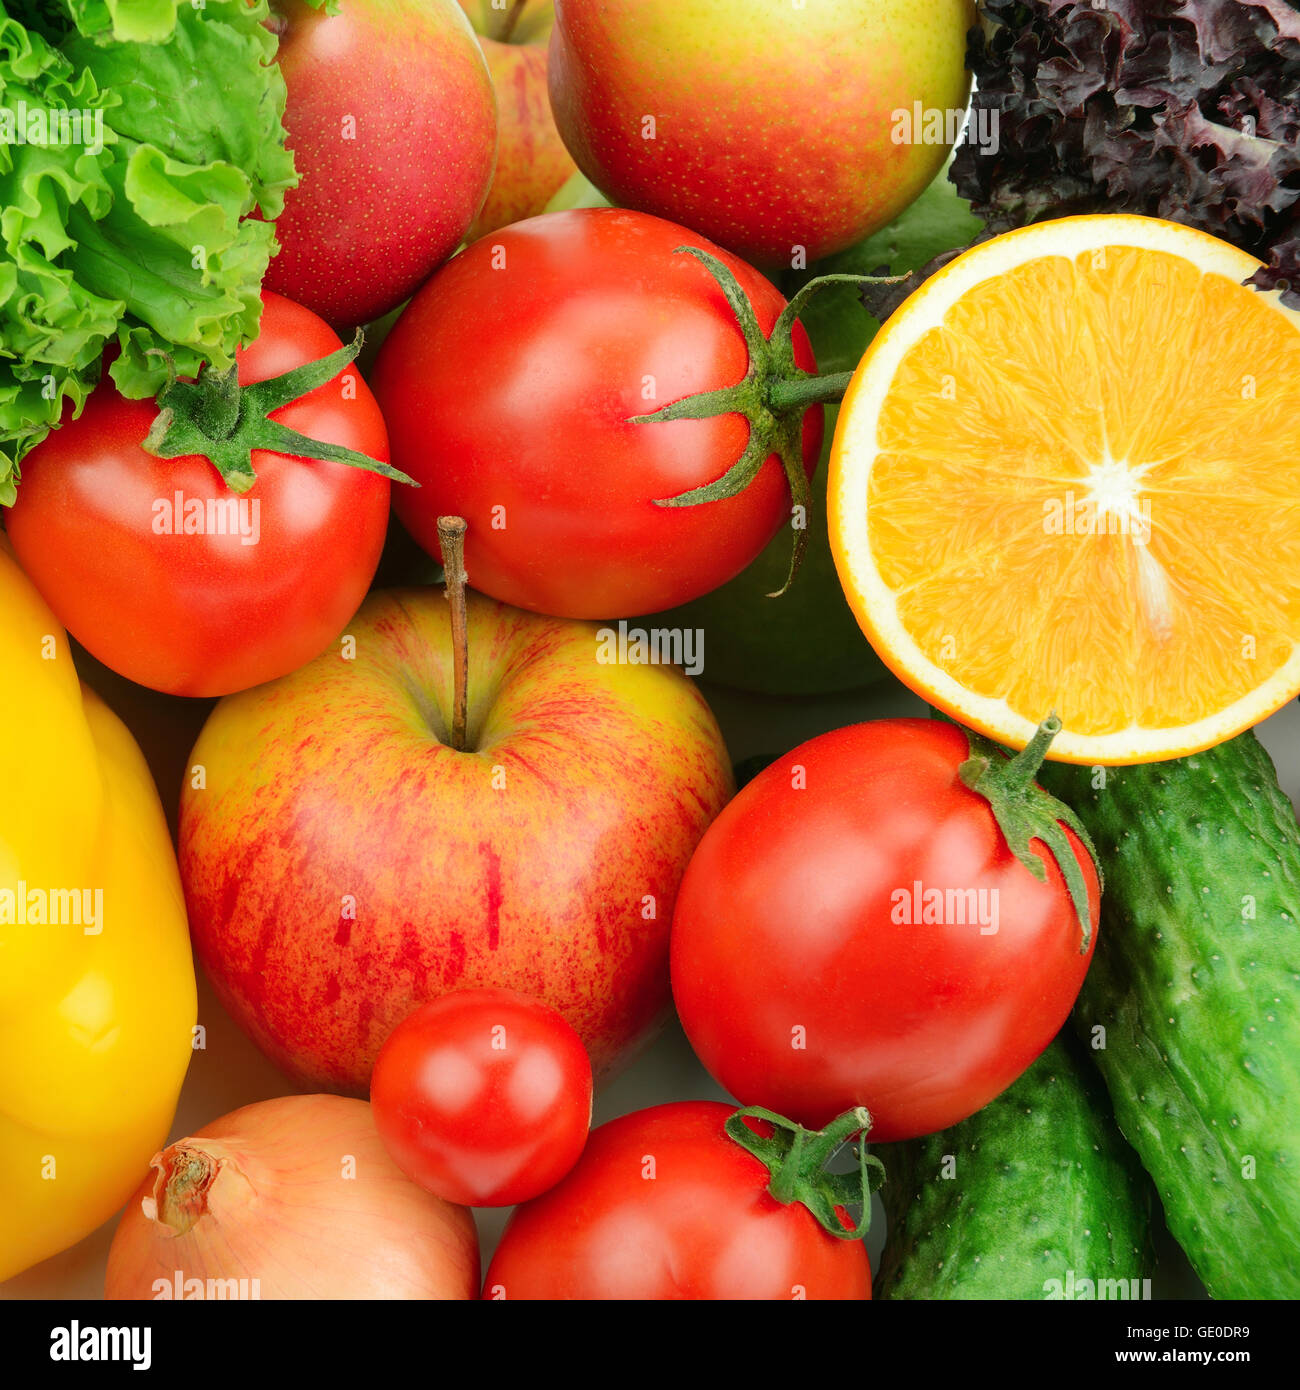 fruits and vegetables background Stock Photo